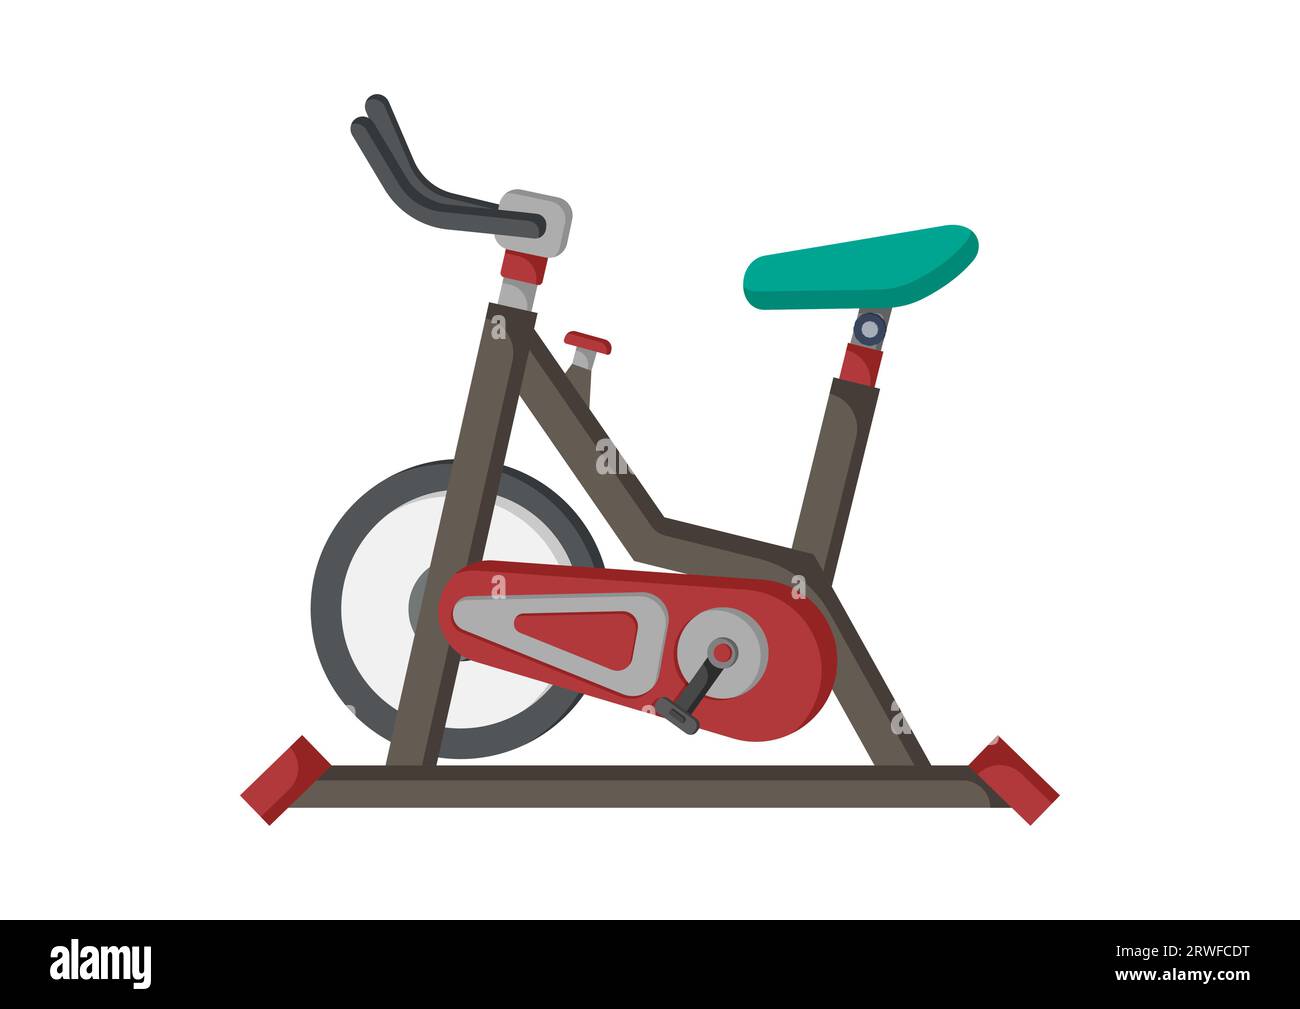 Indoor Spinning Bike for Workout Vector Illustration Isolated on White Background Stock Vector